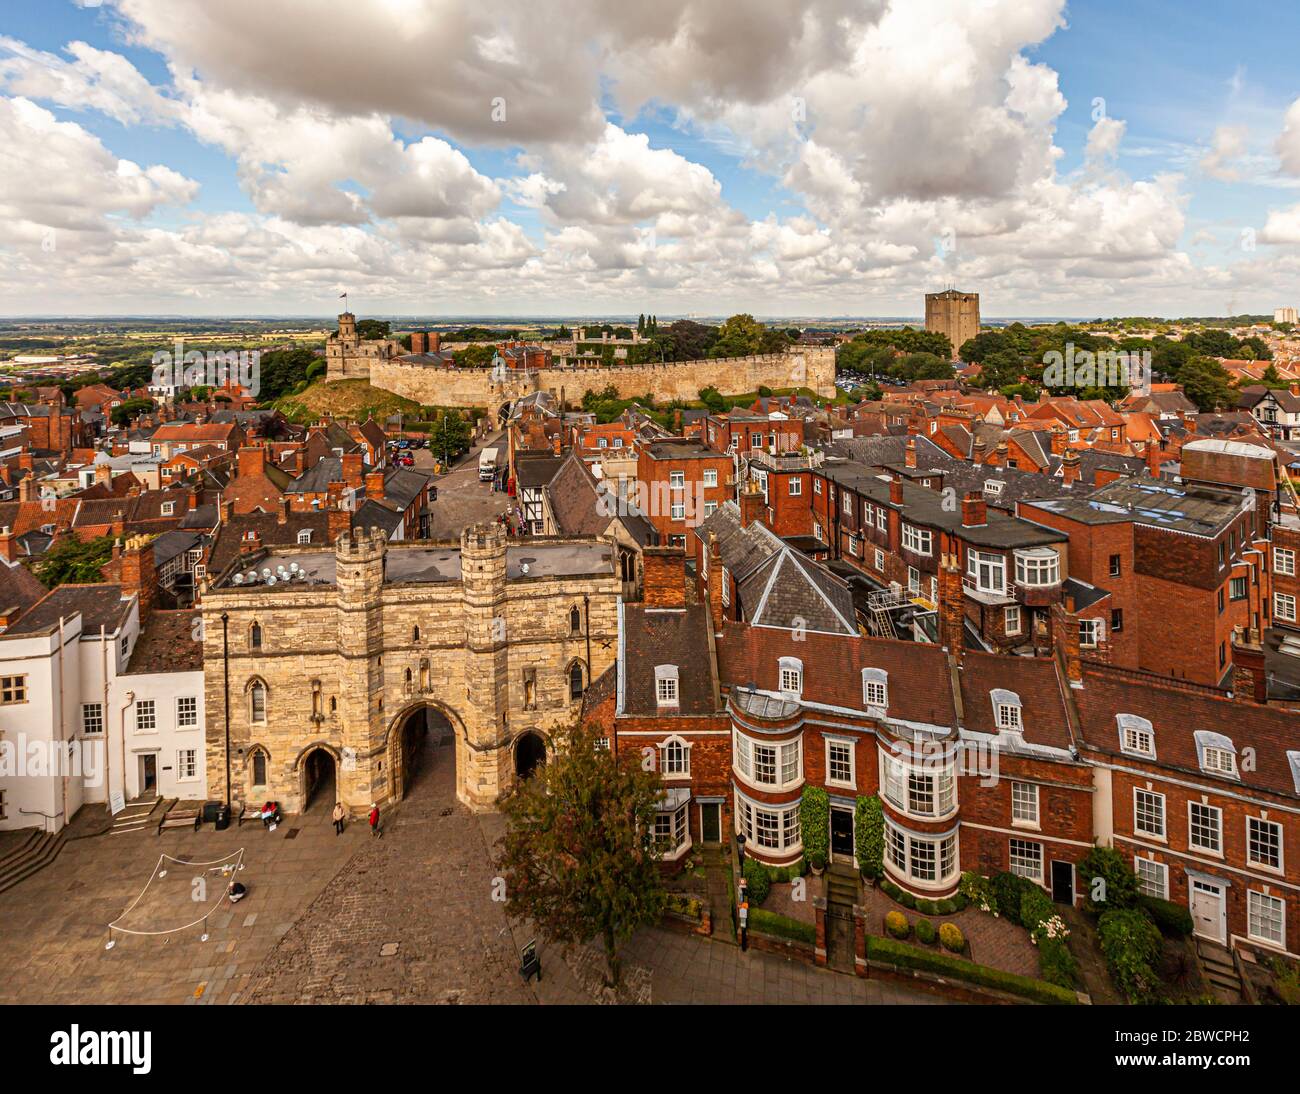 Cityscape of Lincoln seen from the Top of Lincoln Cathedral, England Stock Photo